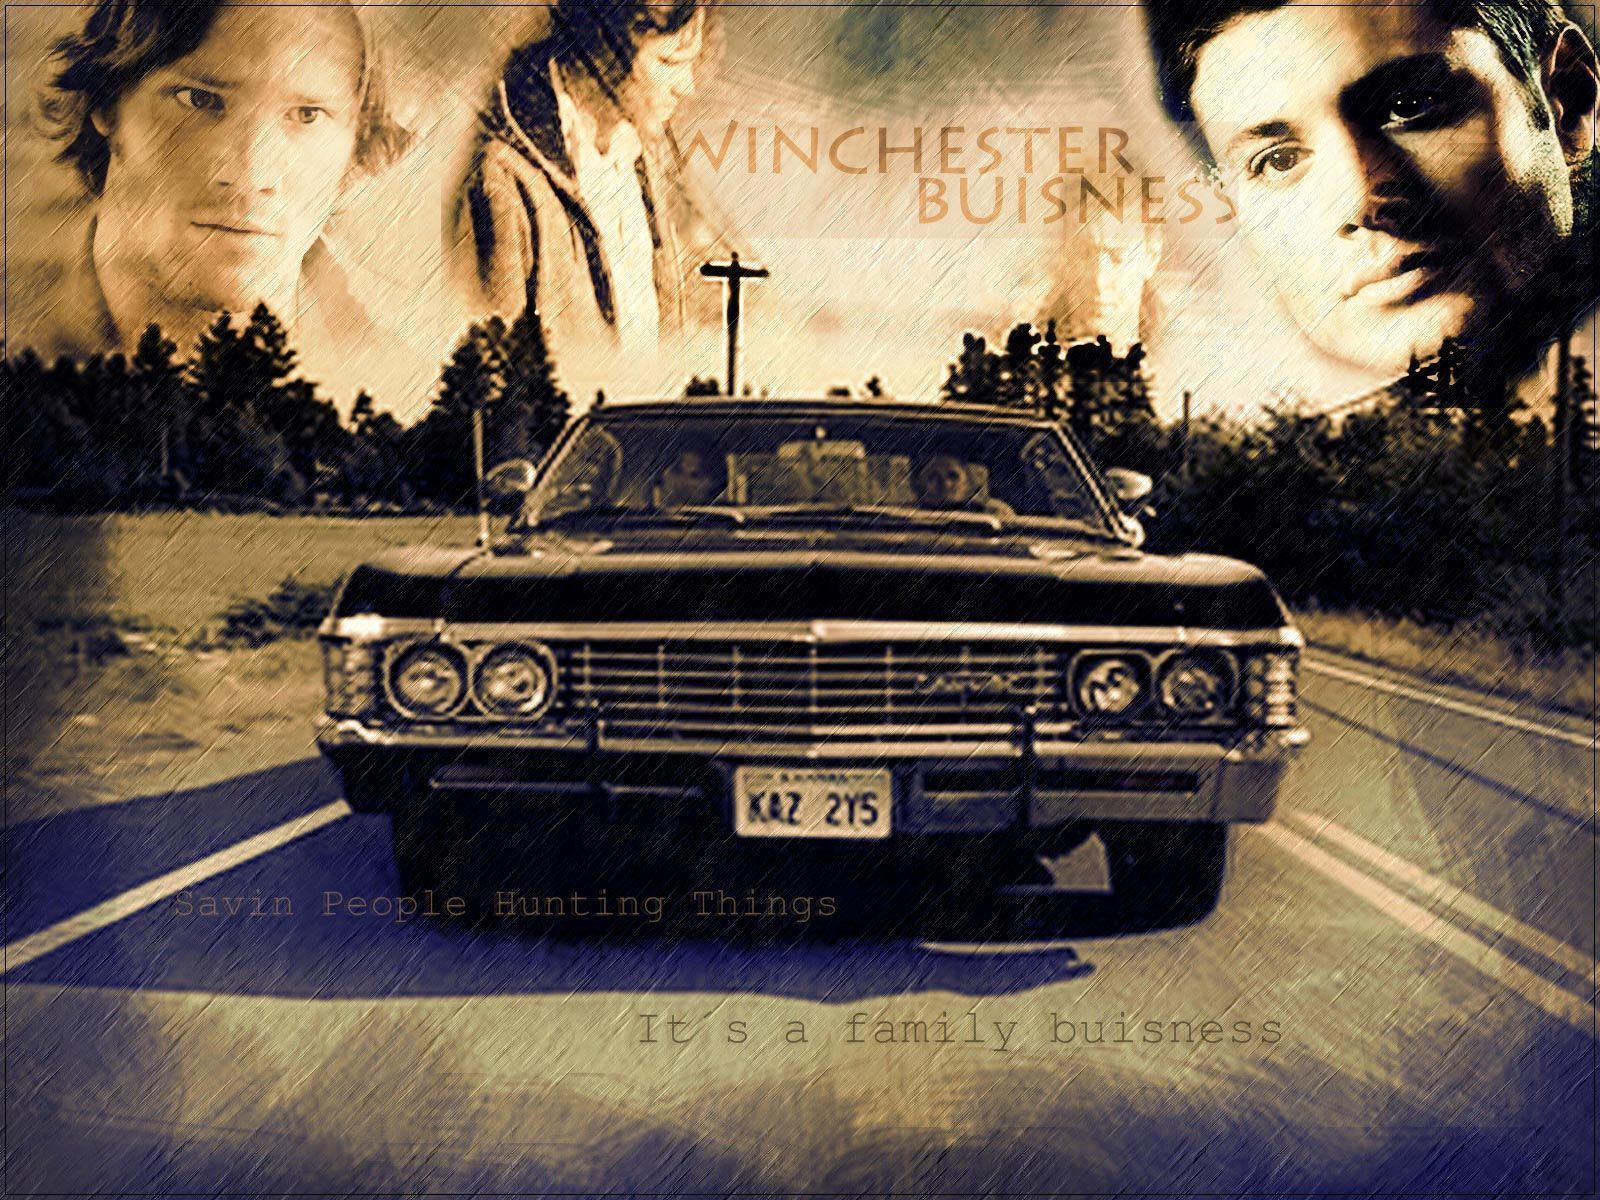 104 Supernatural HD Wallpapers Backgrounds - Wallpaper Abyss